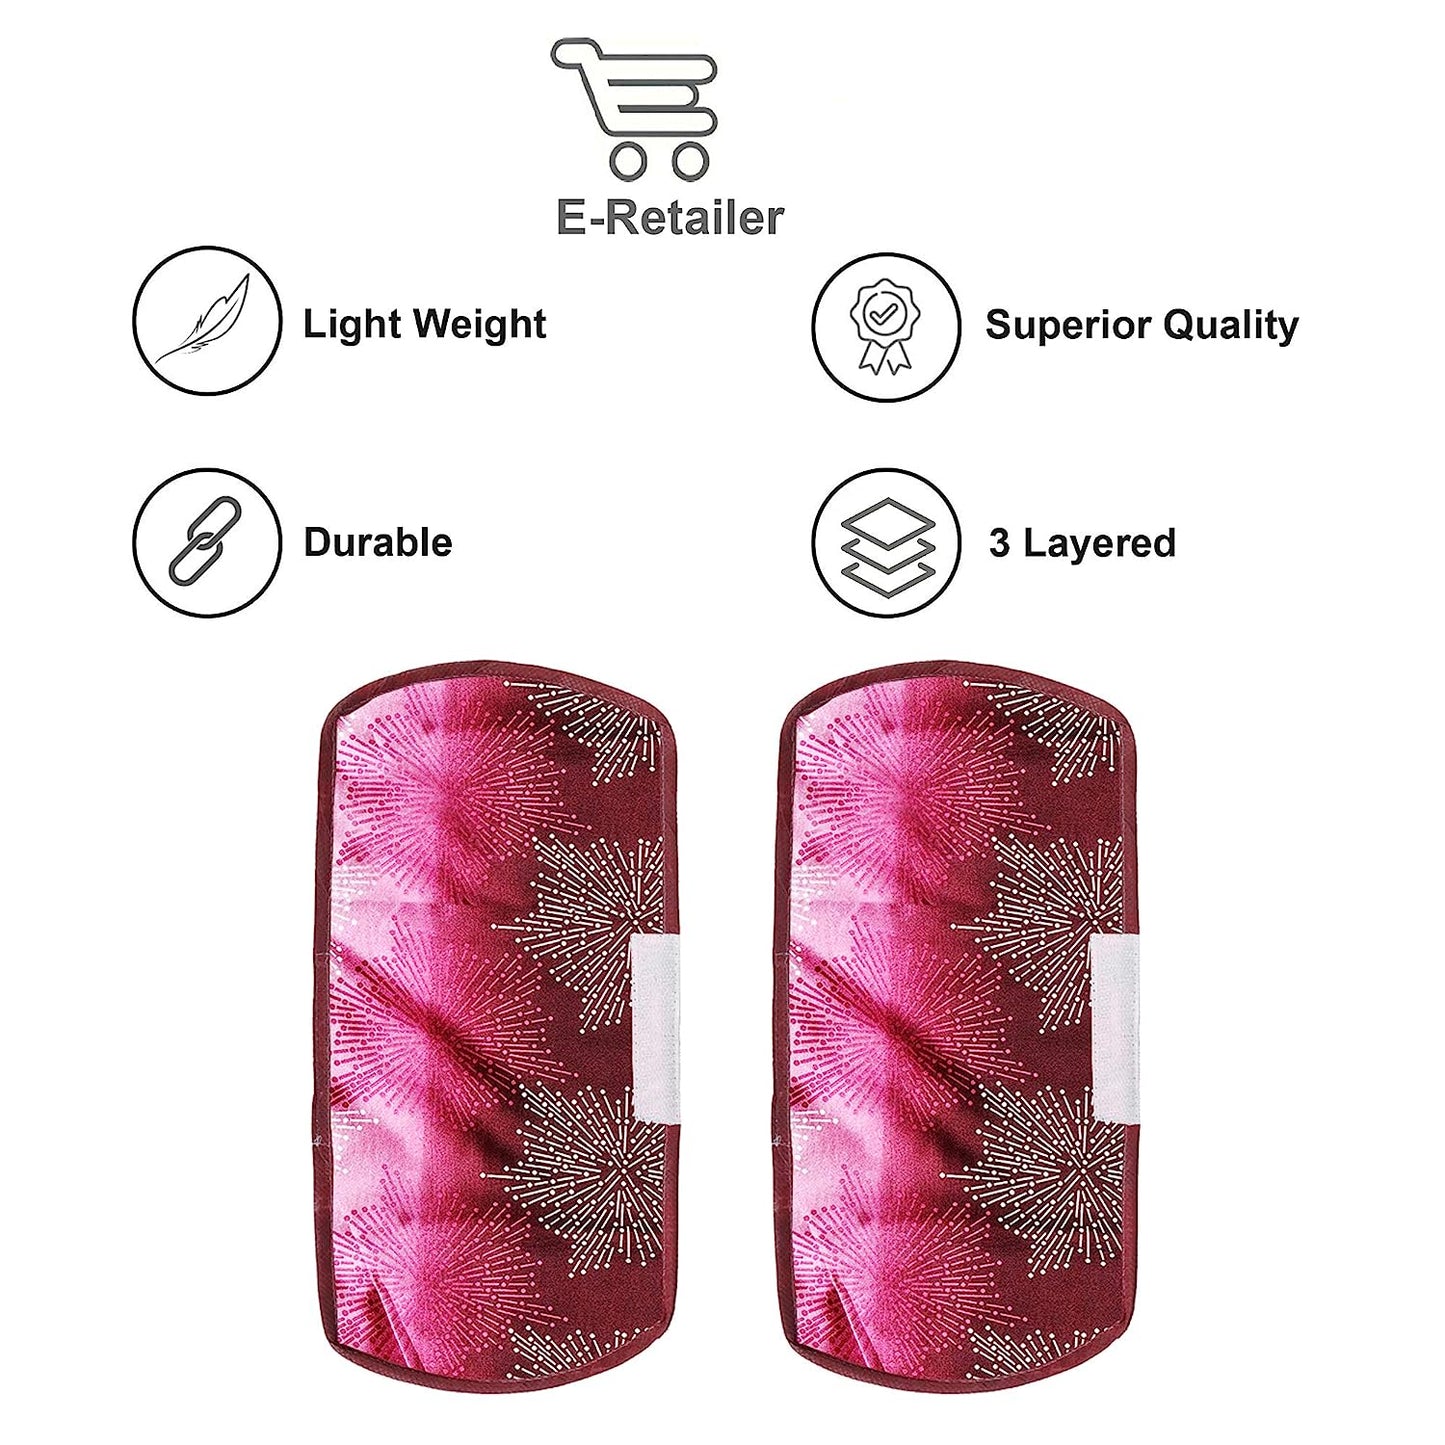 Fridge Cover Handle Cover Polyester High Material Cover For All Fridge Handle Use (Set Of 2 Pcs) Multi Design